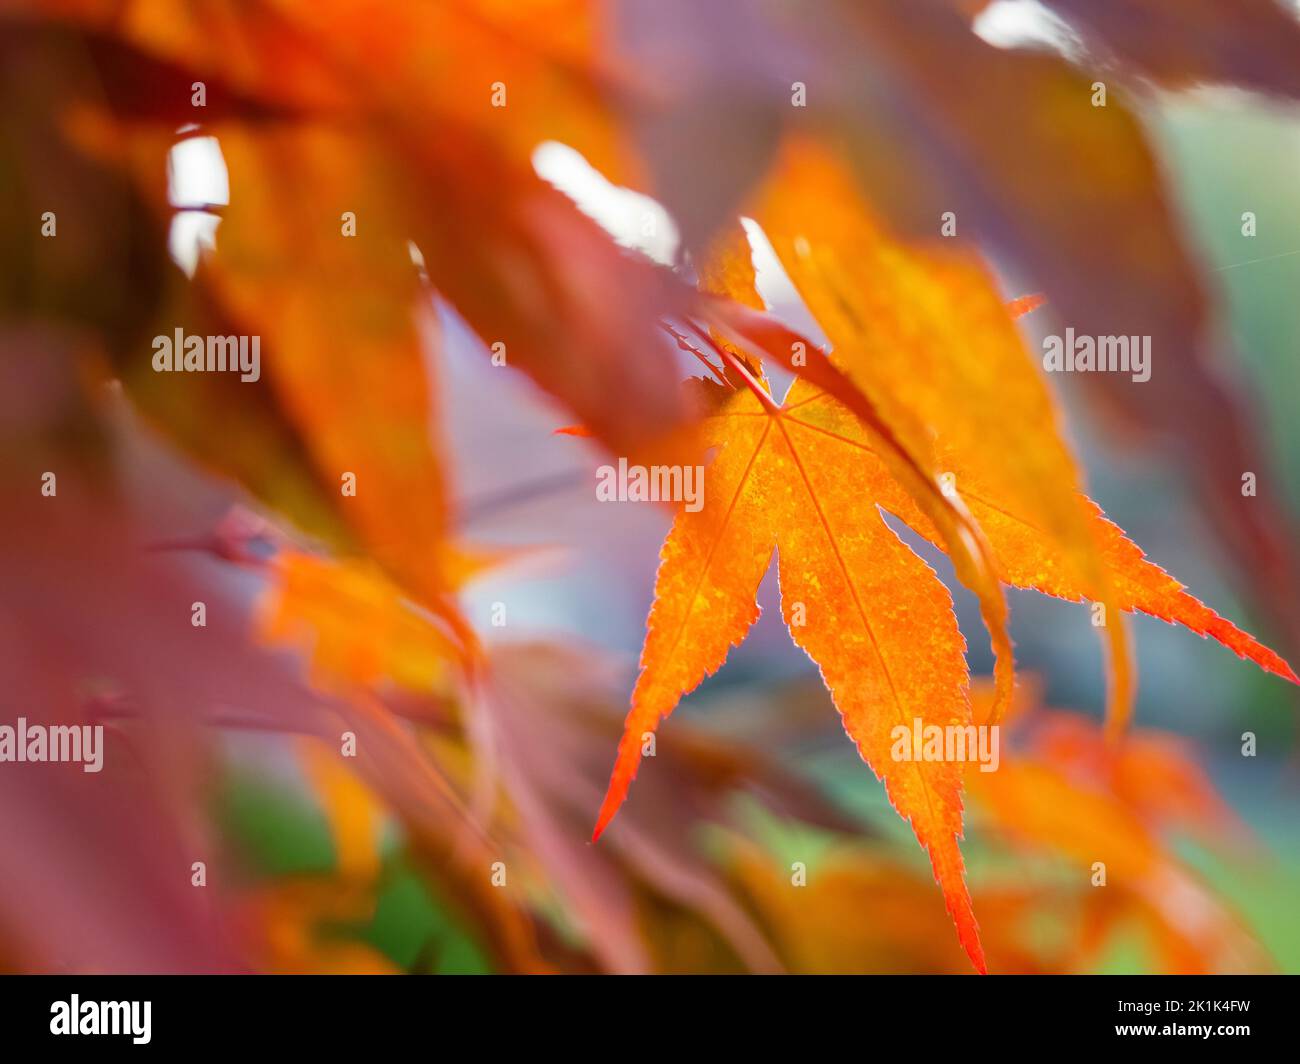 red maple tree leaves in backlit, close up photo of beautiful red autumn foliage. natural vibrant fall season colors Stock Photo